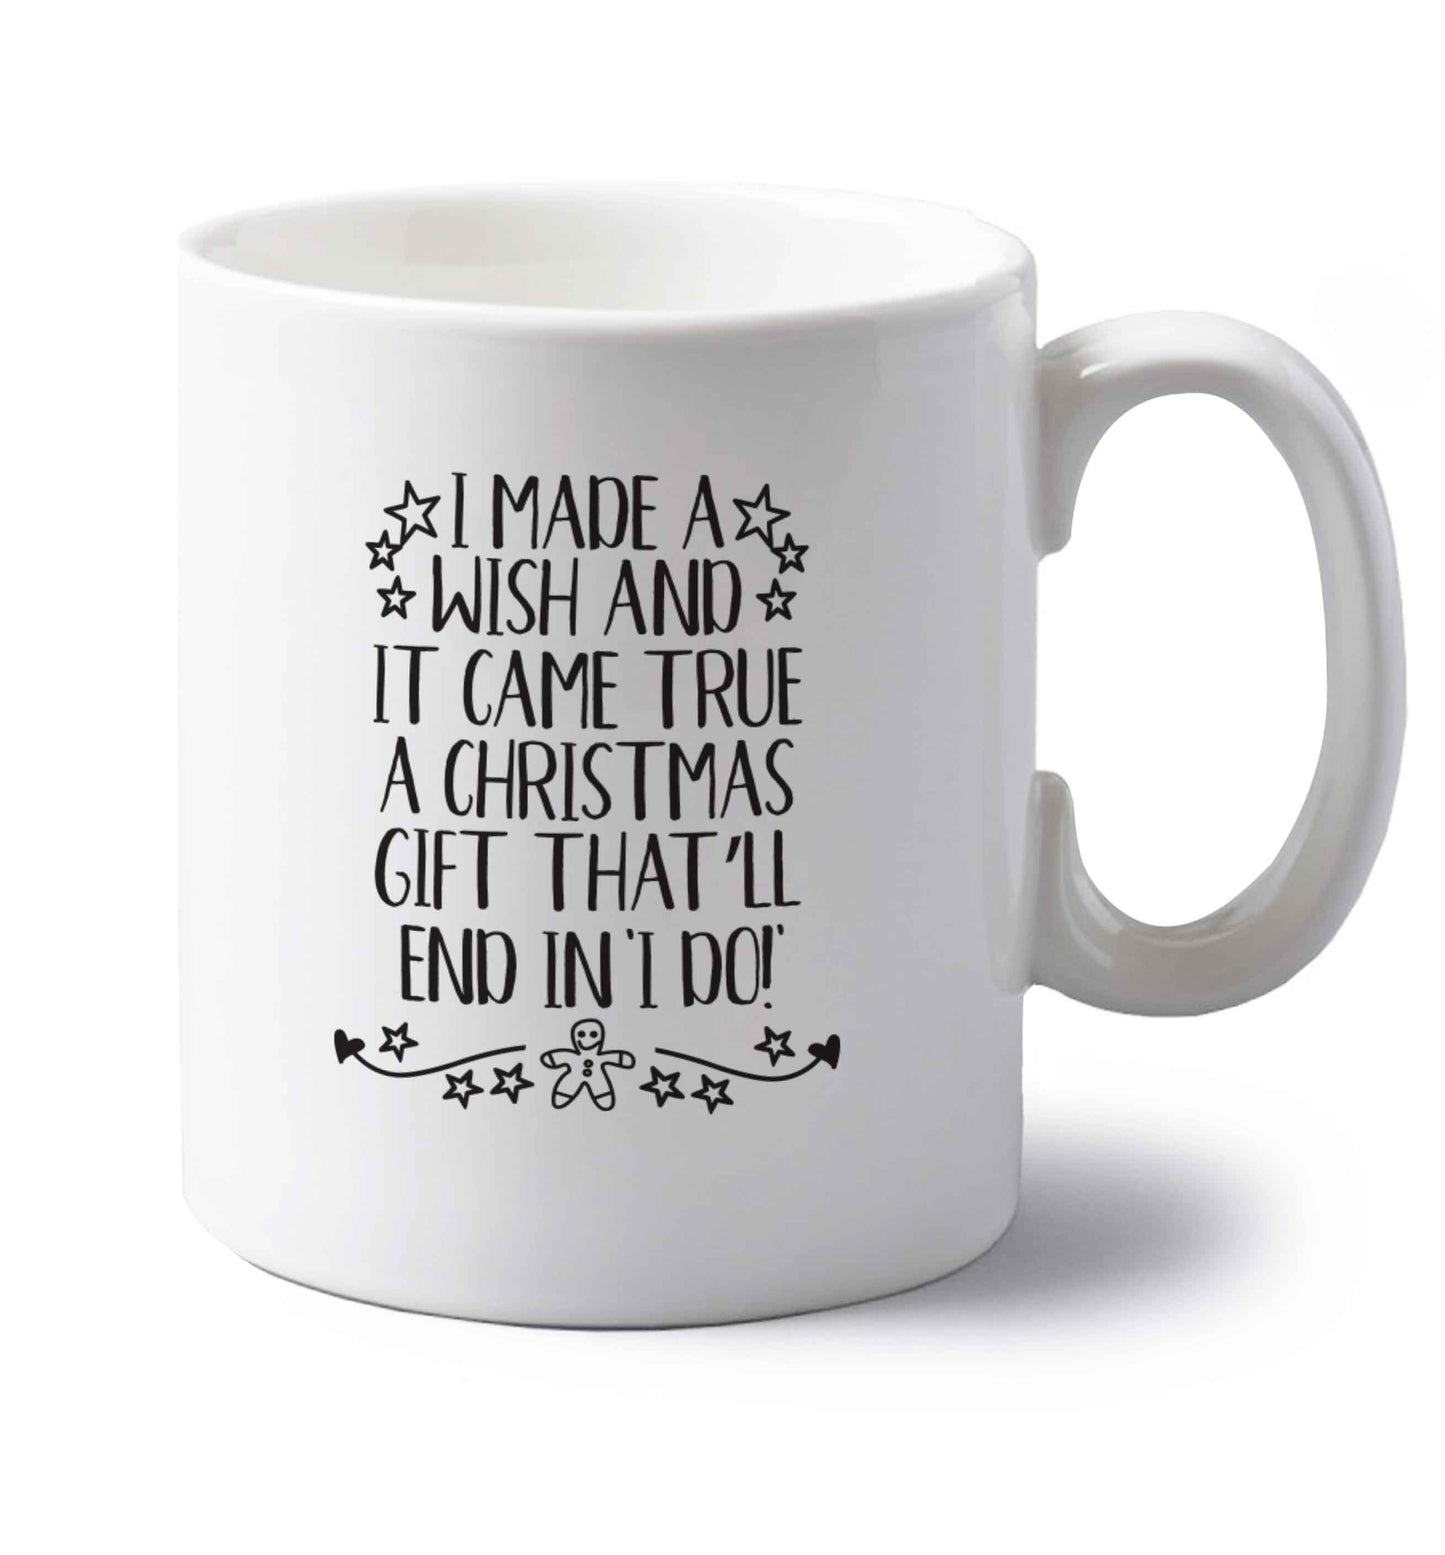 I made a wish and it came true a Christmas gift that'll end in 'I do' left handed white ceramic mug 